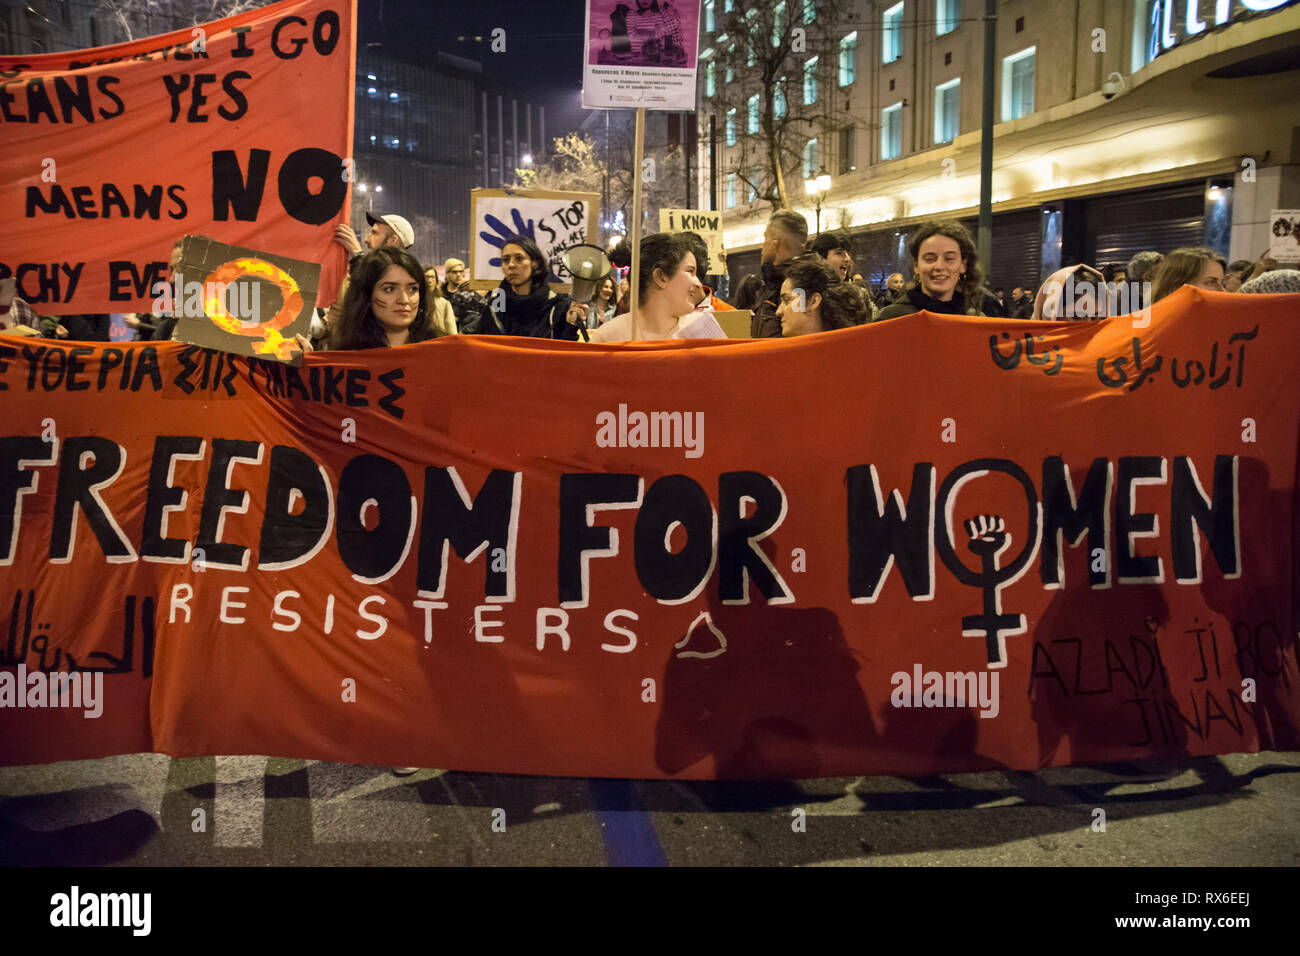 Athens, Greece. 8th Mar 2019. Women and men march in the streets of Athens holding banners and shouting slogans against patriarchy. Feminist, leftist and human rights organizations staged a demonstration to honor International Women's Day and demand equal rights and respect. Credit: Nikolas Georgiou/Alamy Live News Stock Photo